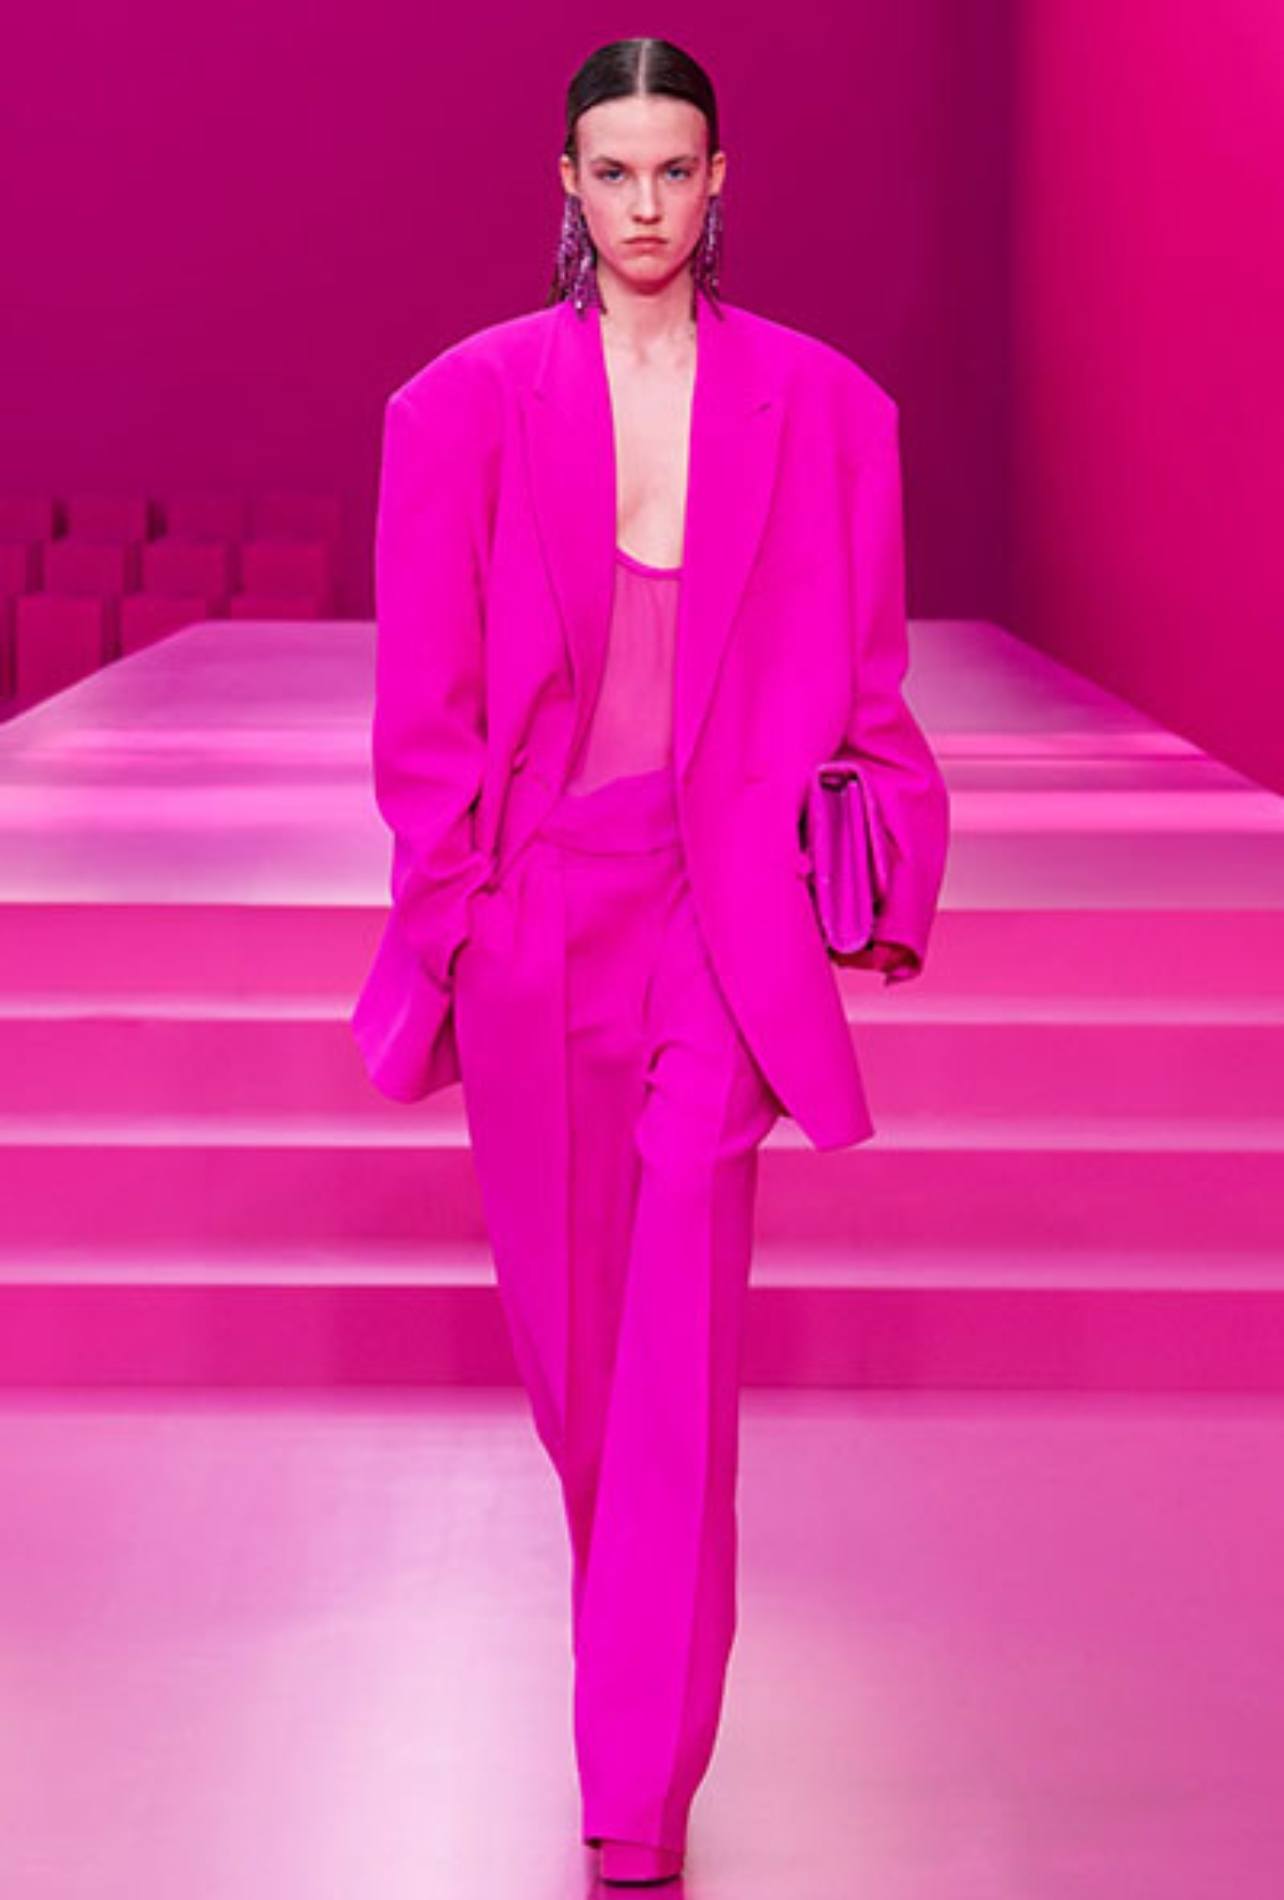 Model in Valentino fashion show wearing a head-to-toe pink look